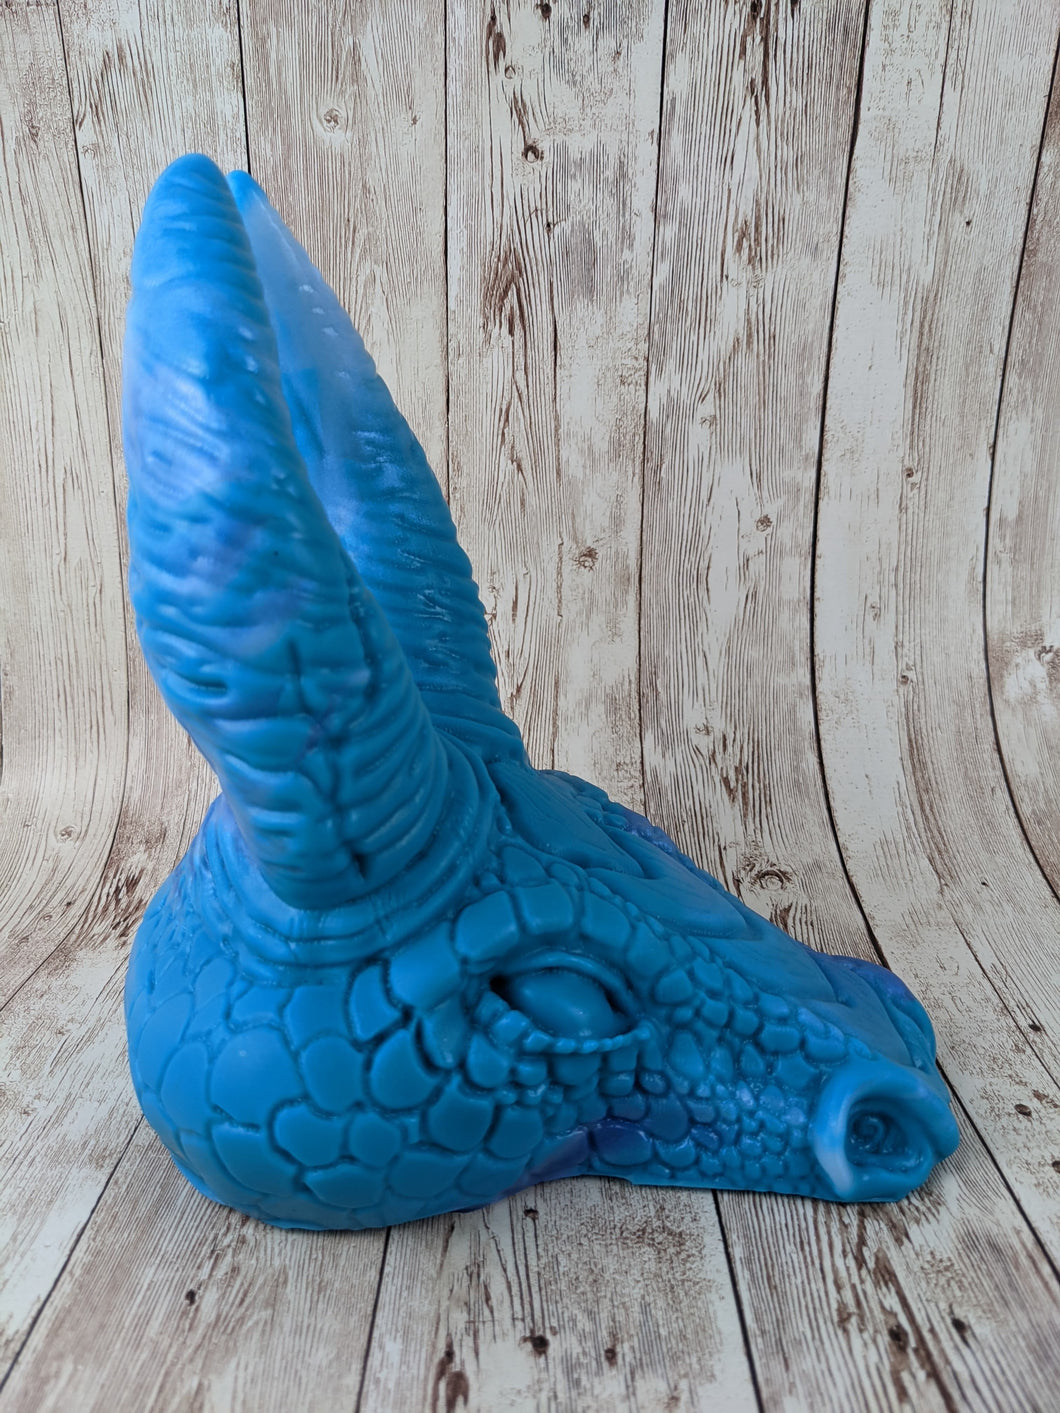 Arith the Swamp Dragon, Size Large (Super Soft Firmness)